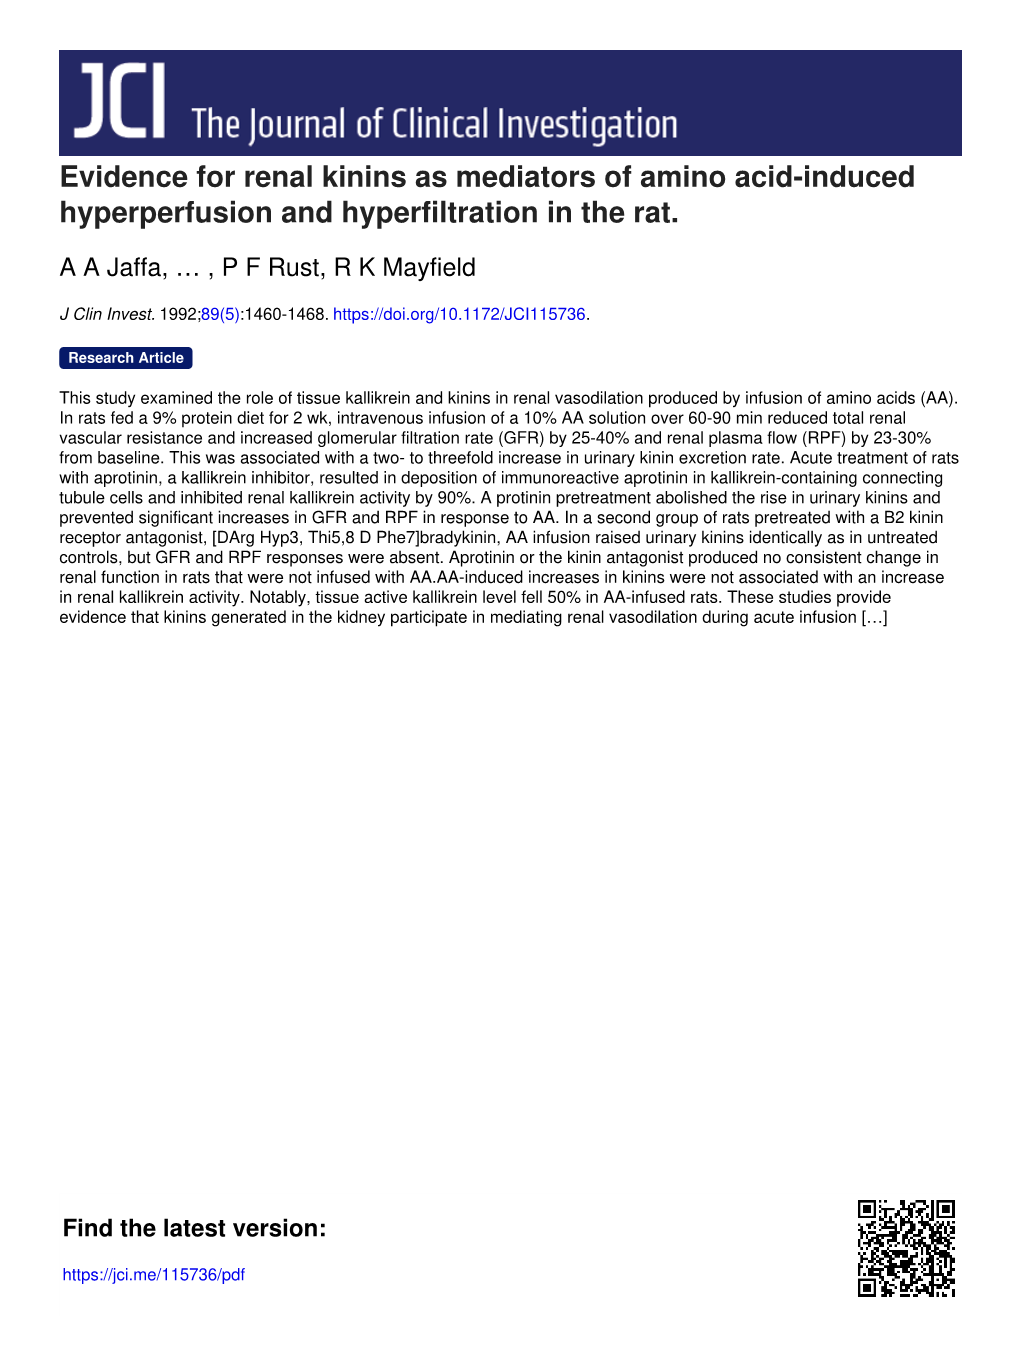 Evidence for Renal Kinins As Mediators of Amino Acid-Induced Hyperperfusion and Hyperfiltration in the Rat